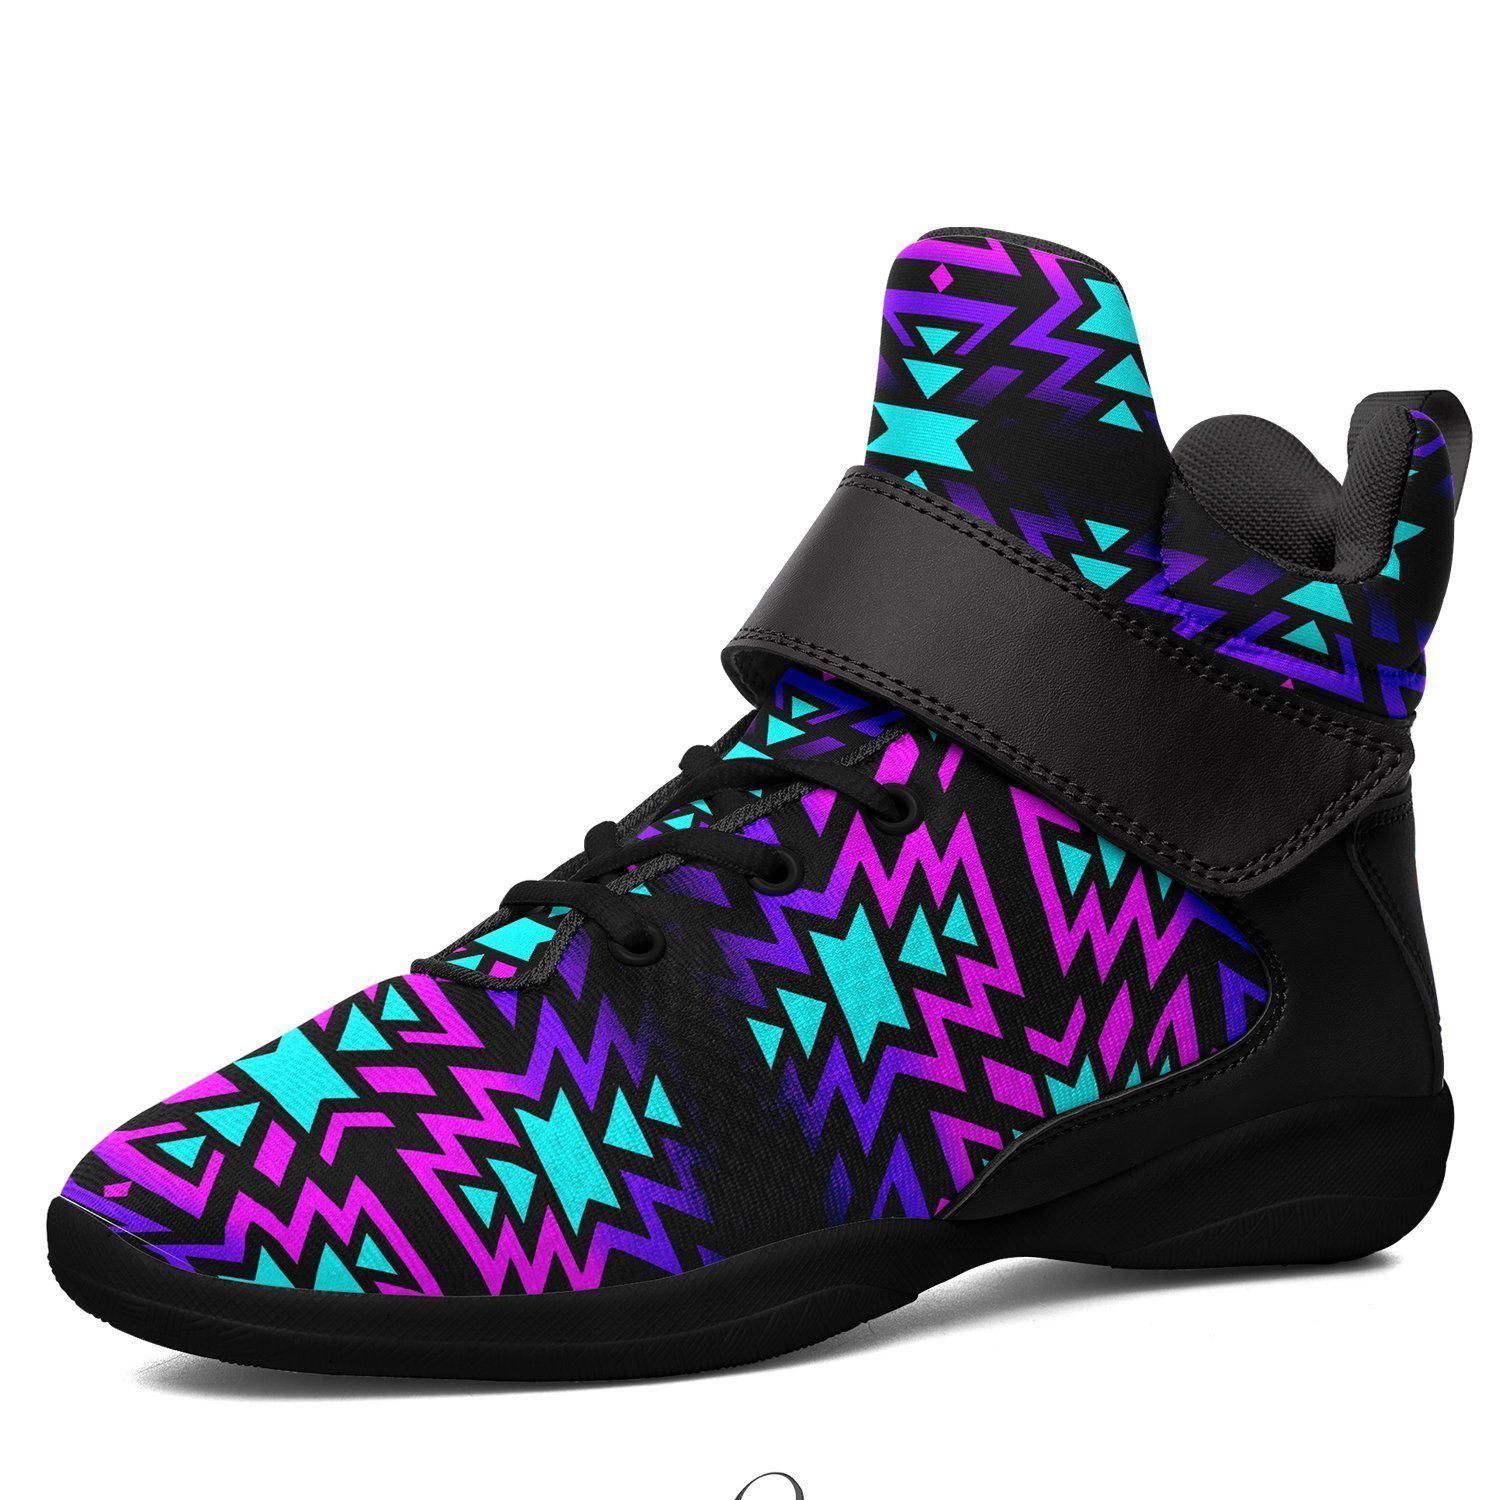 Black Fire Winter Sunset Kid's Ipottaa Basketball / Sport High Top Shoes 49 Dzine US Child 12.5 / EUR 30 Black Sole with Black Strap 